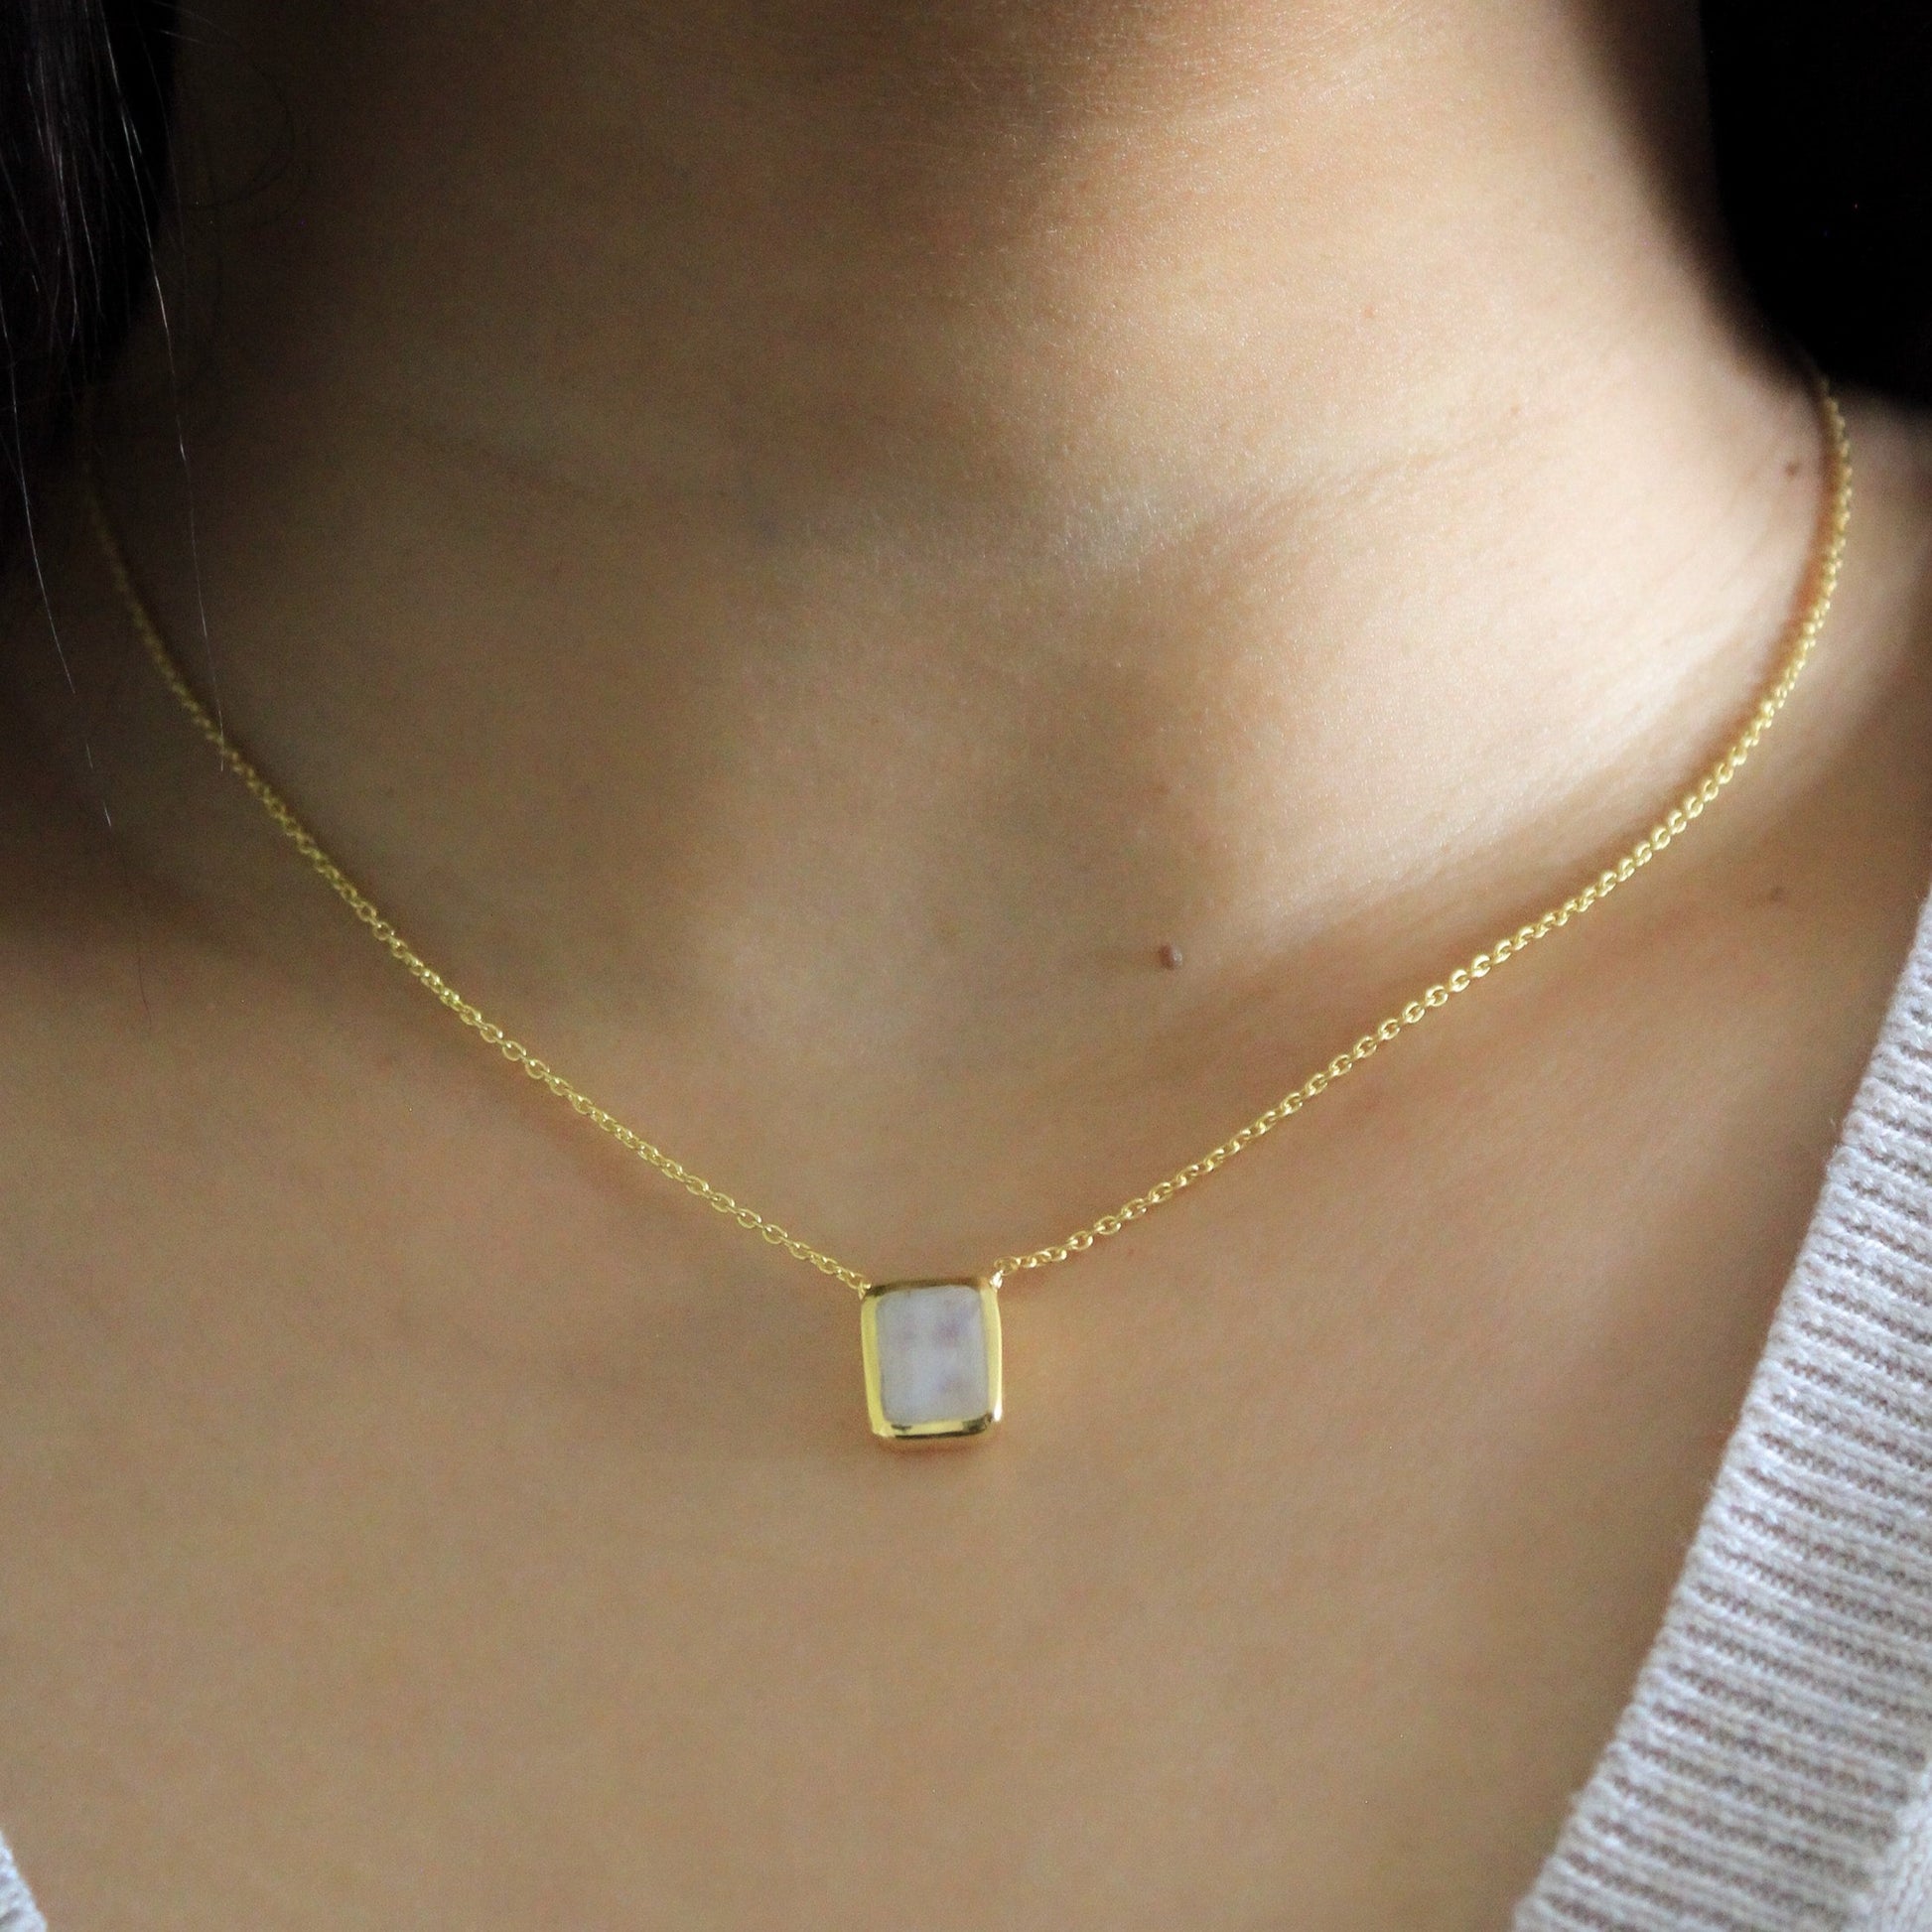 Moonstone Necklace, dainty Jewellery, women's necklace, 18k Gold Vermeil, Small necklaces